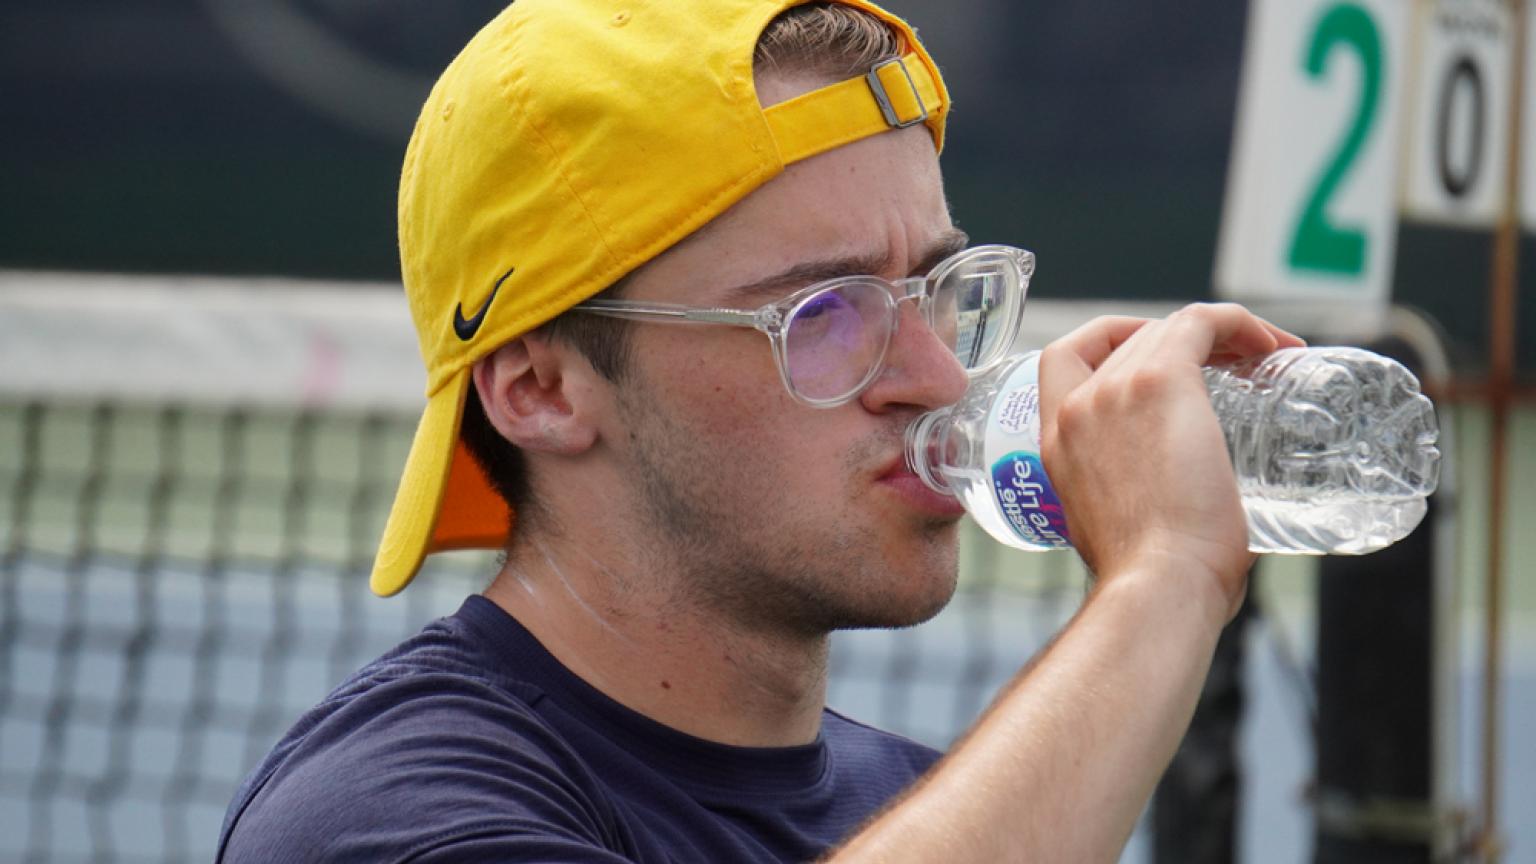 One of the athletes takes a sip of his water after a long day of competition.